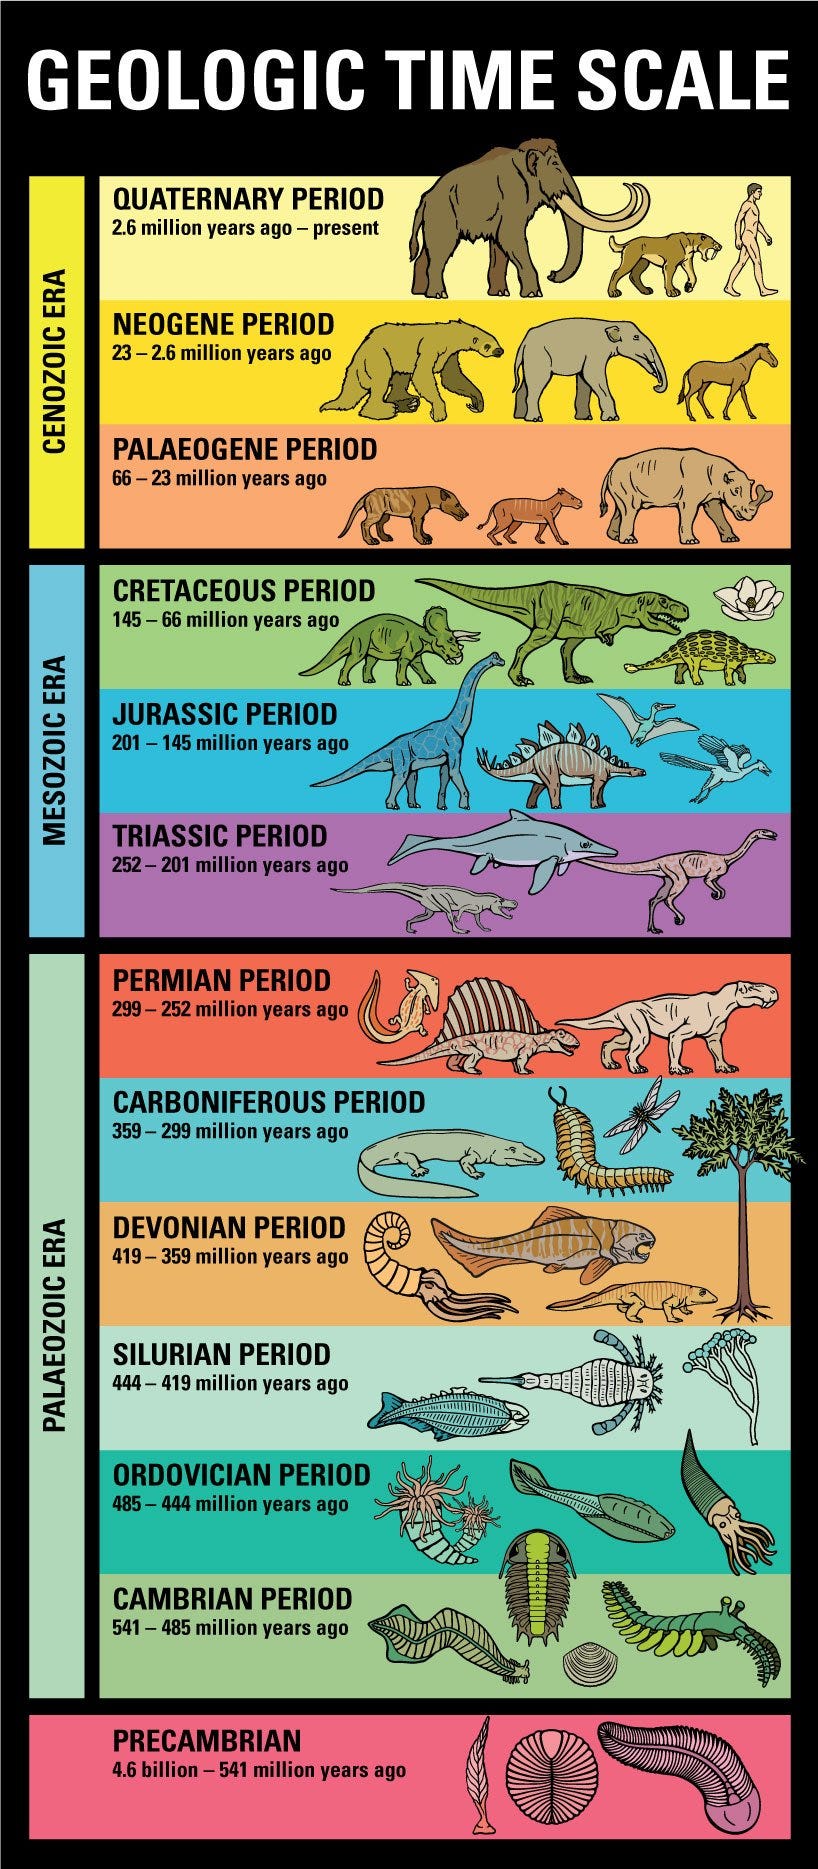 Geologic Time scale